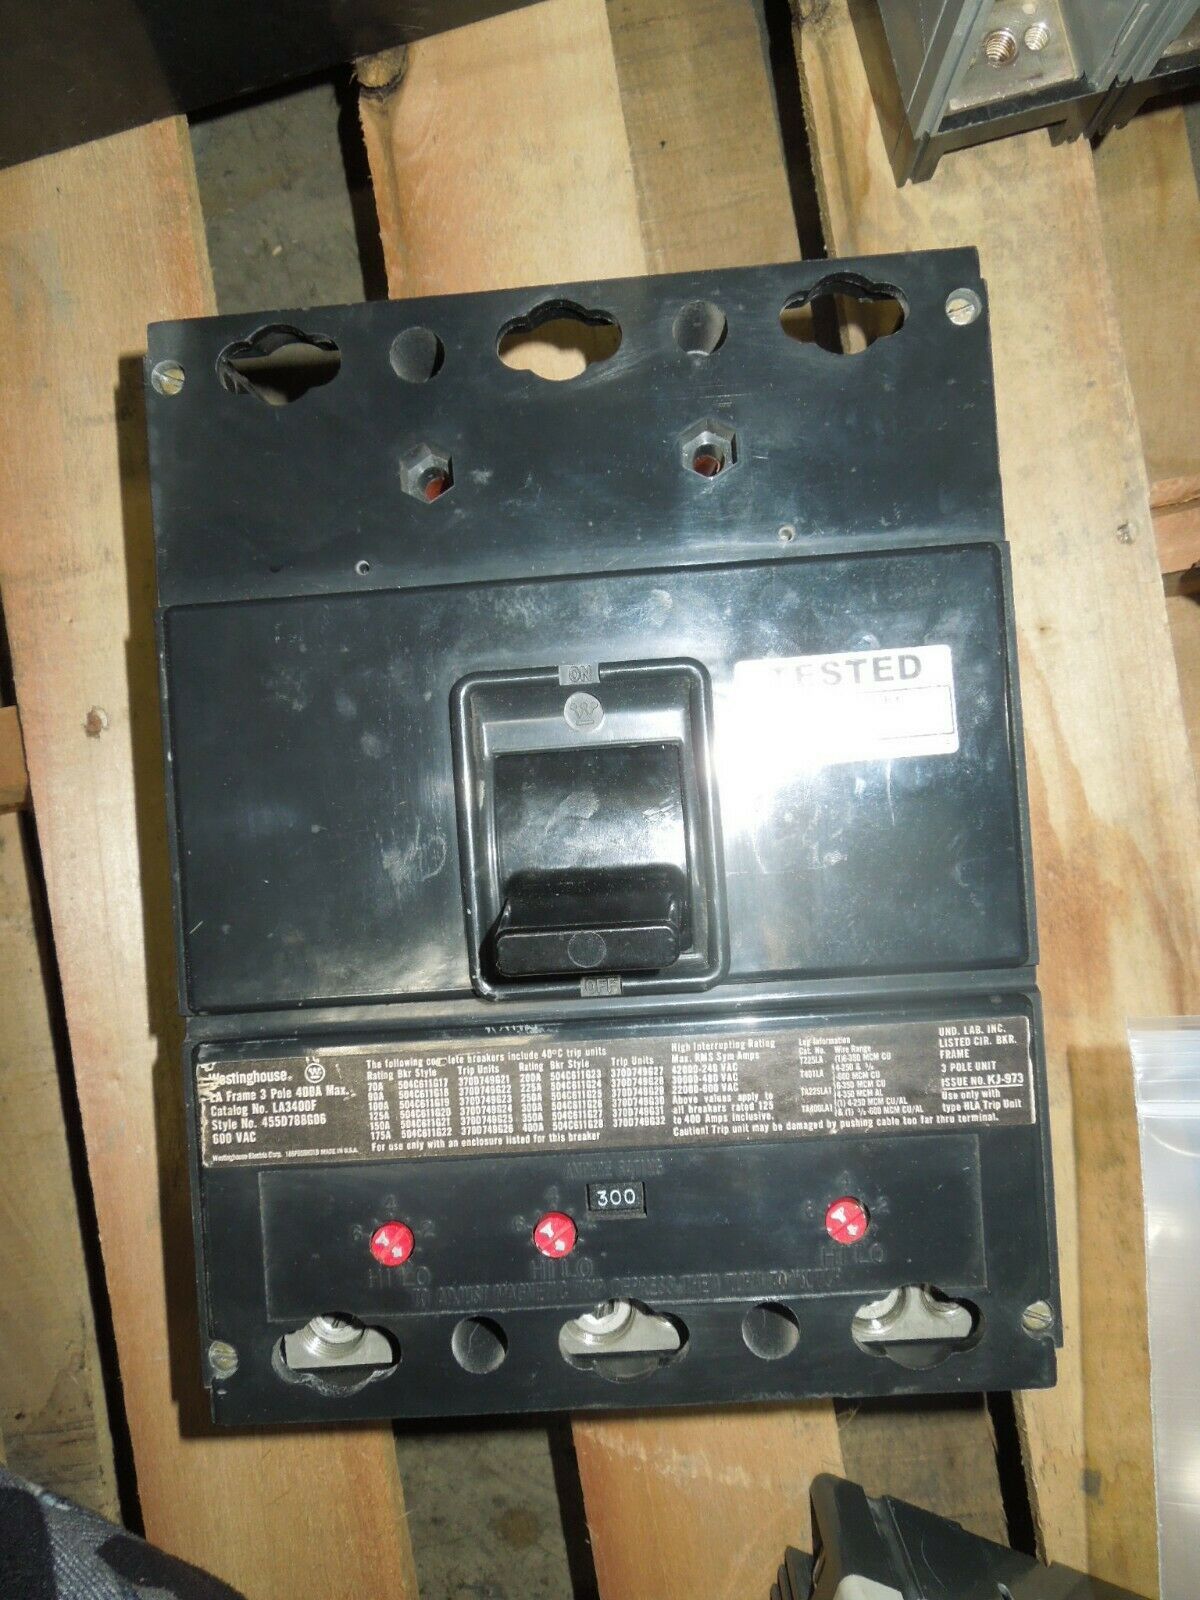 Westinghouse LA3400F 400A Frame 300A Rated 3P 600V Used w/ Test Report - $850.00